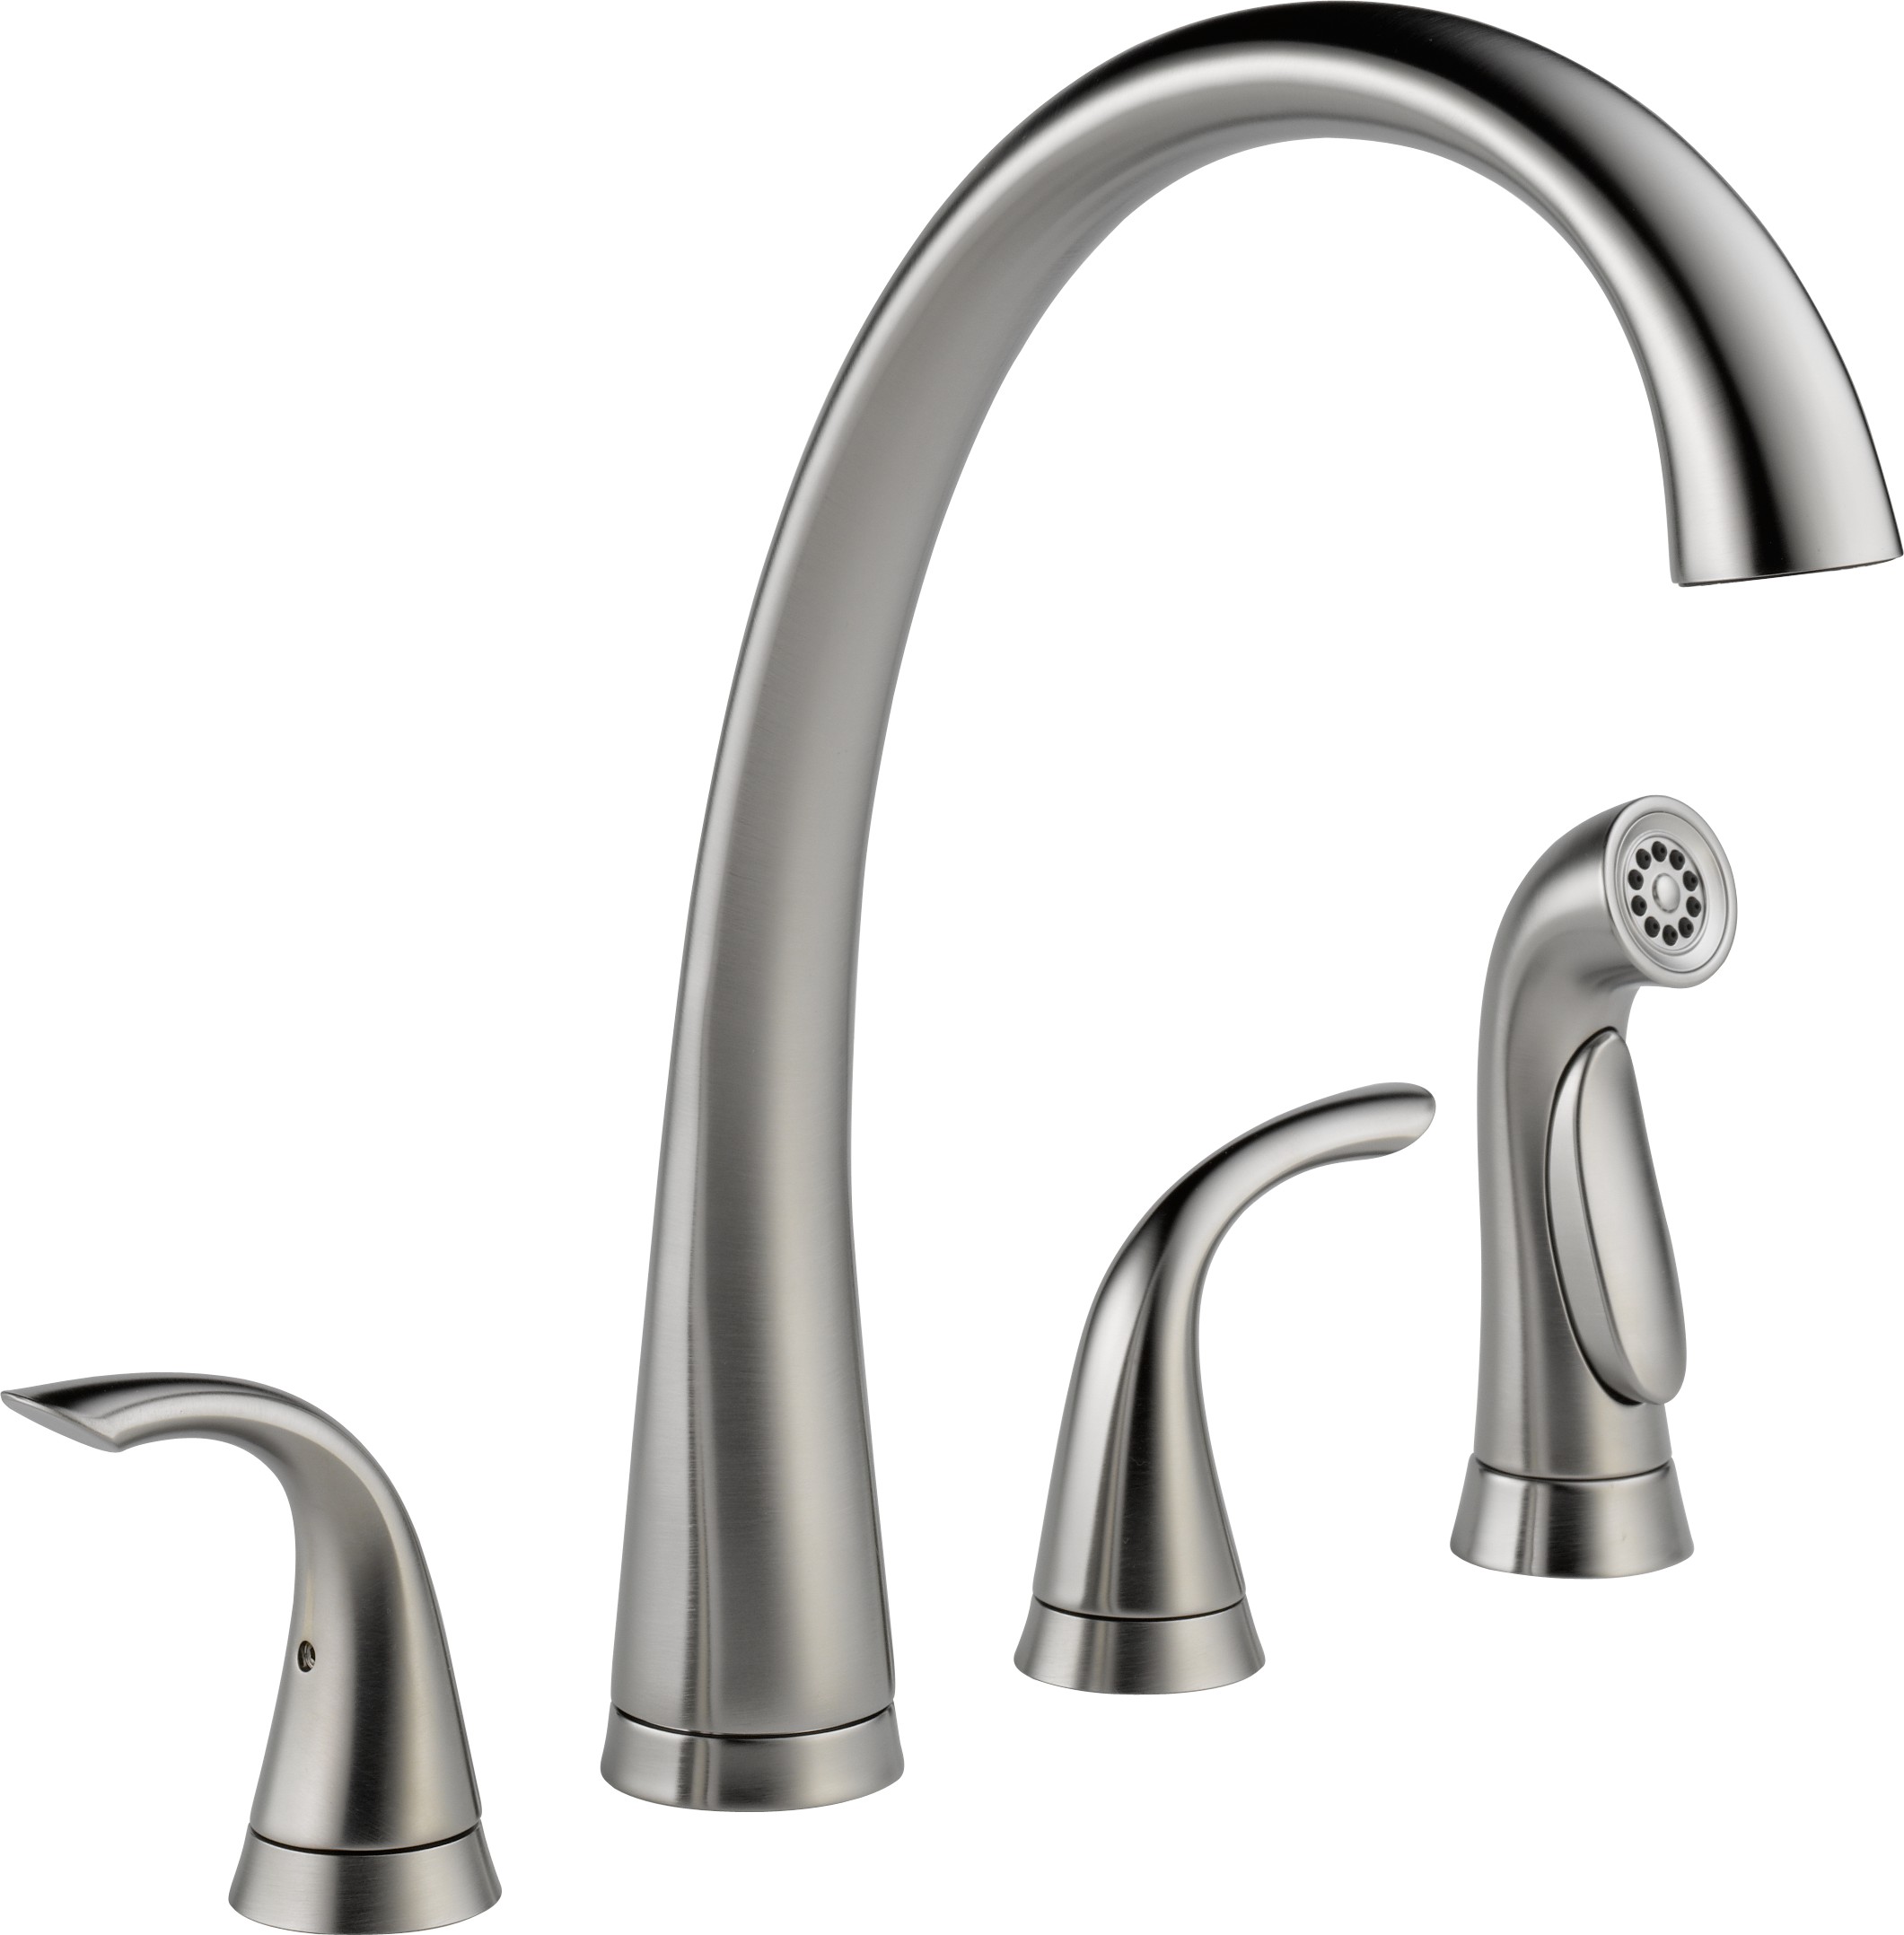 Delta-Delex-Brizo | 2480-AR-DST | DELTA 2480-AR-DST PILAR WATERFALL WIDESPREAD KITCHEN FAUCET WITH  SIDE SPRAY AR ARCTIC STAINLESS 2-HANDLE 4-HOLE